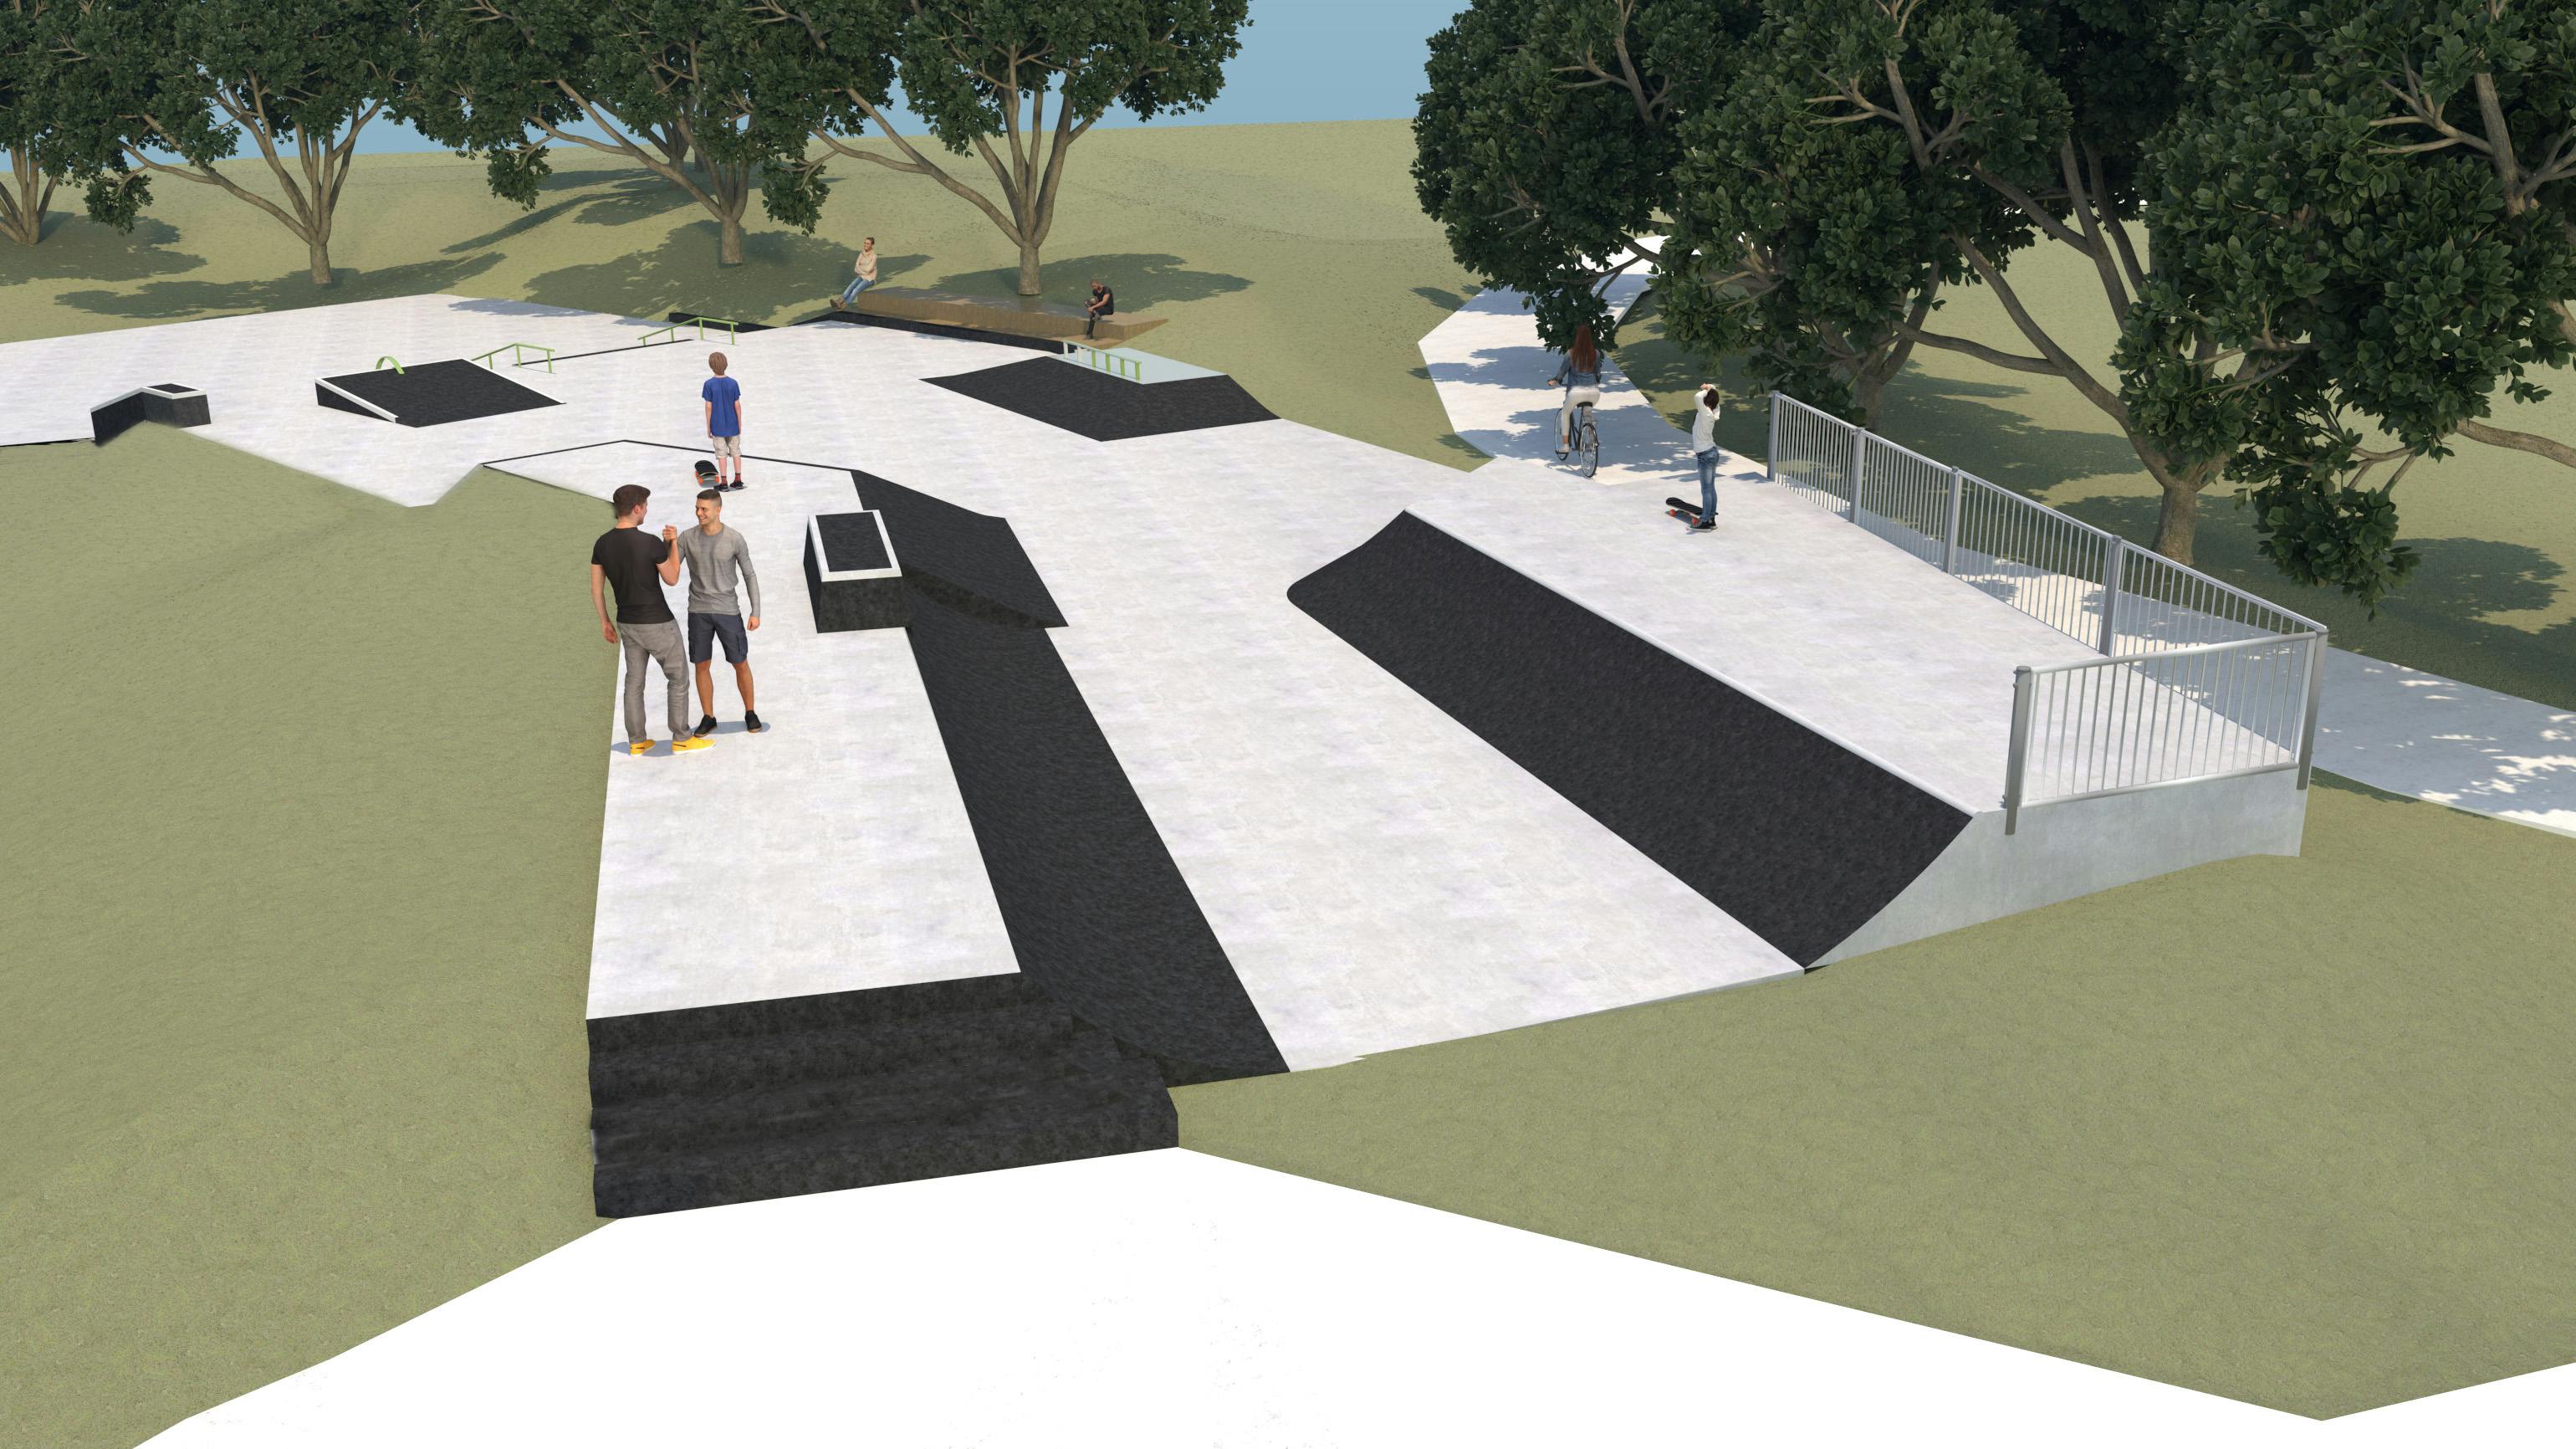 Render of proposed new skateable elements at Booker Place Park